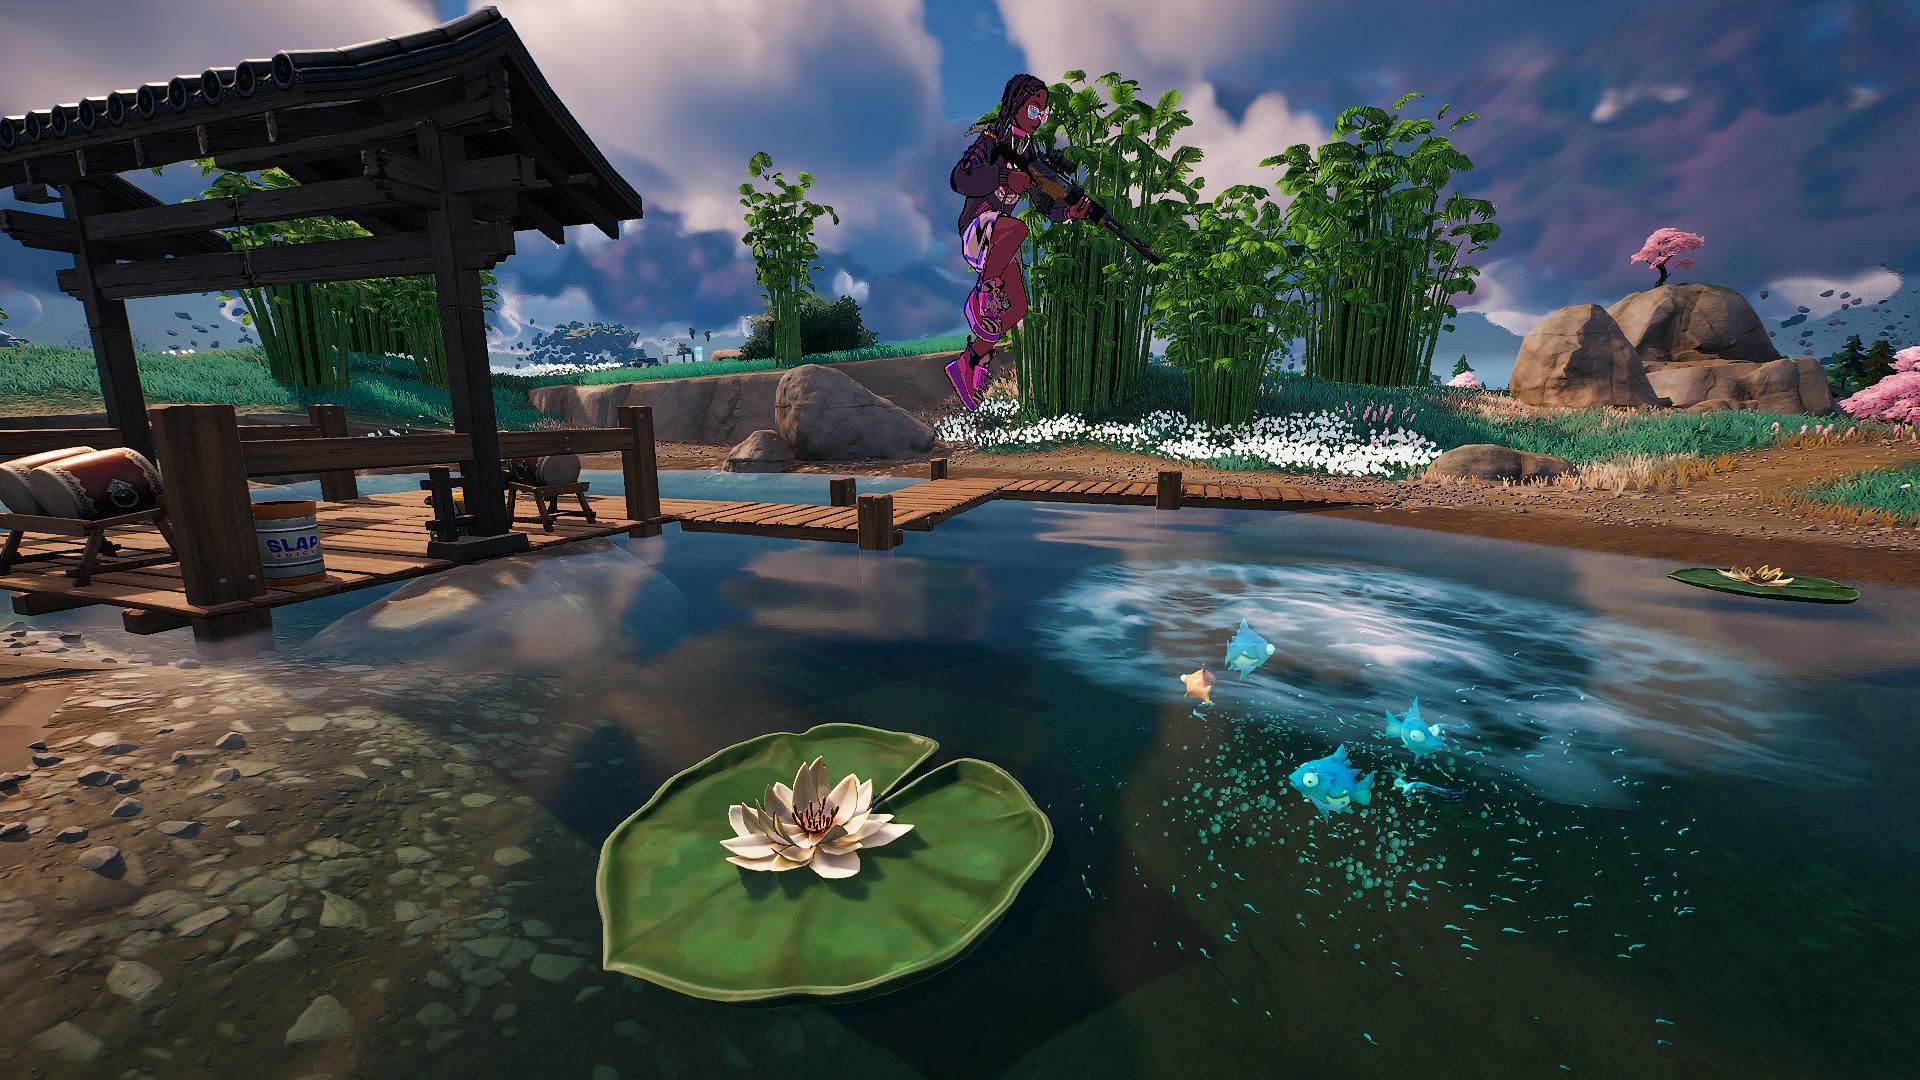 Lily pads can only be found in water (Image via Epic Games/Fortnite)